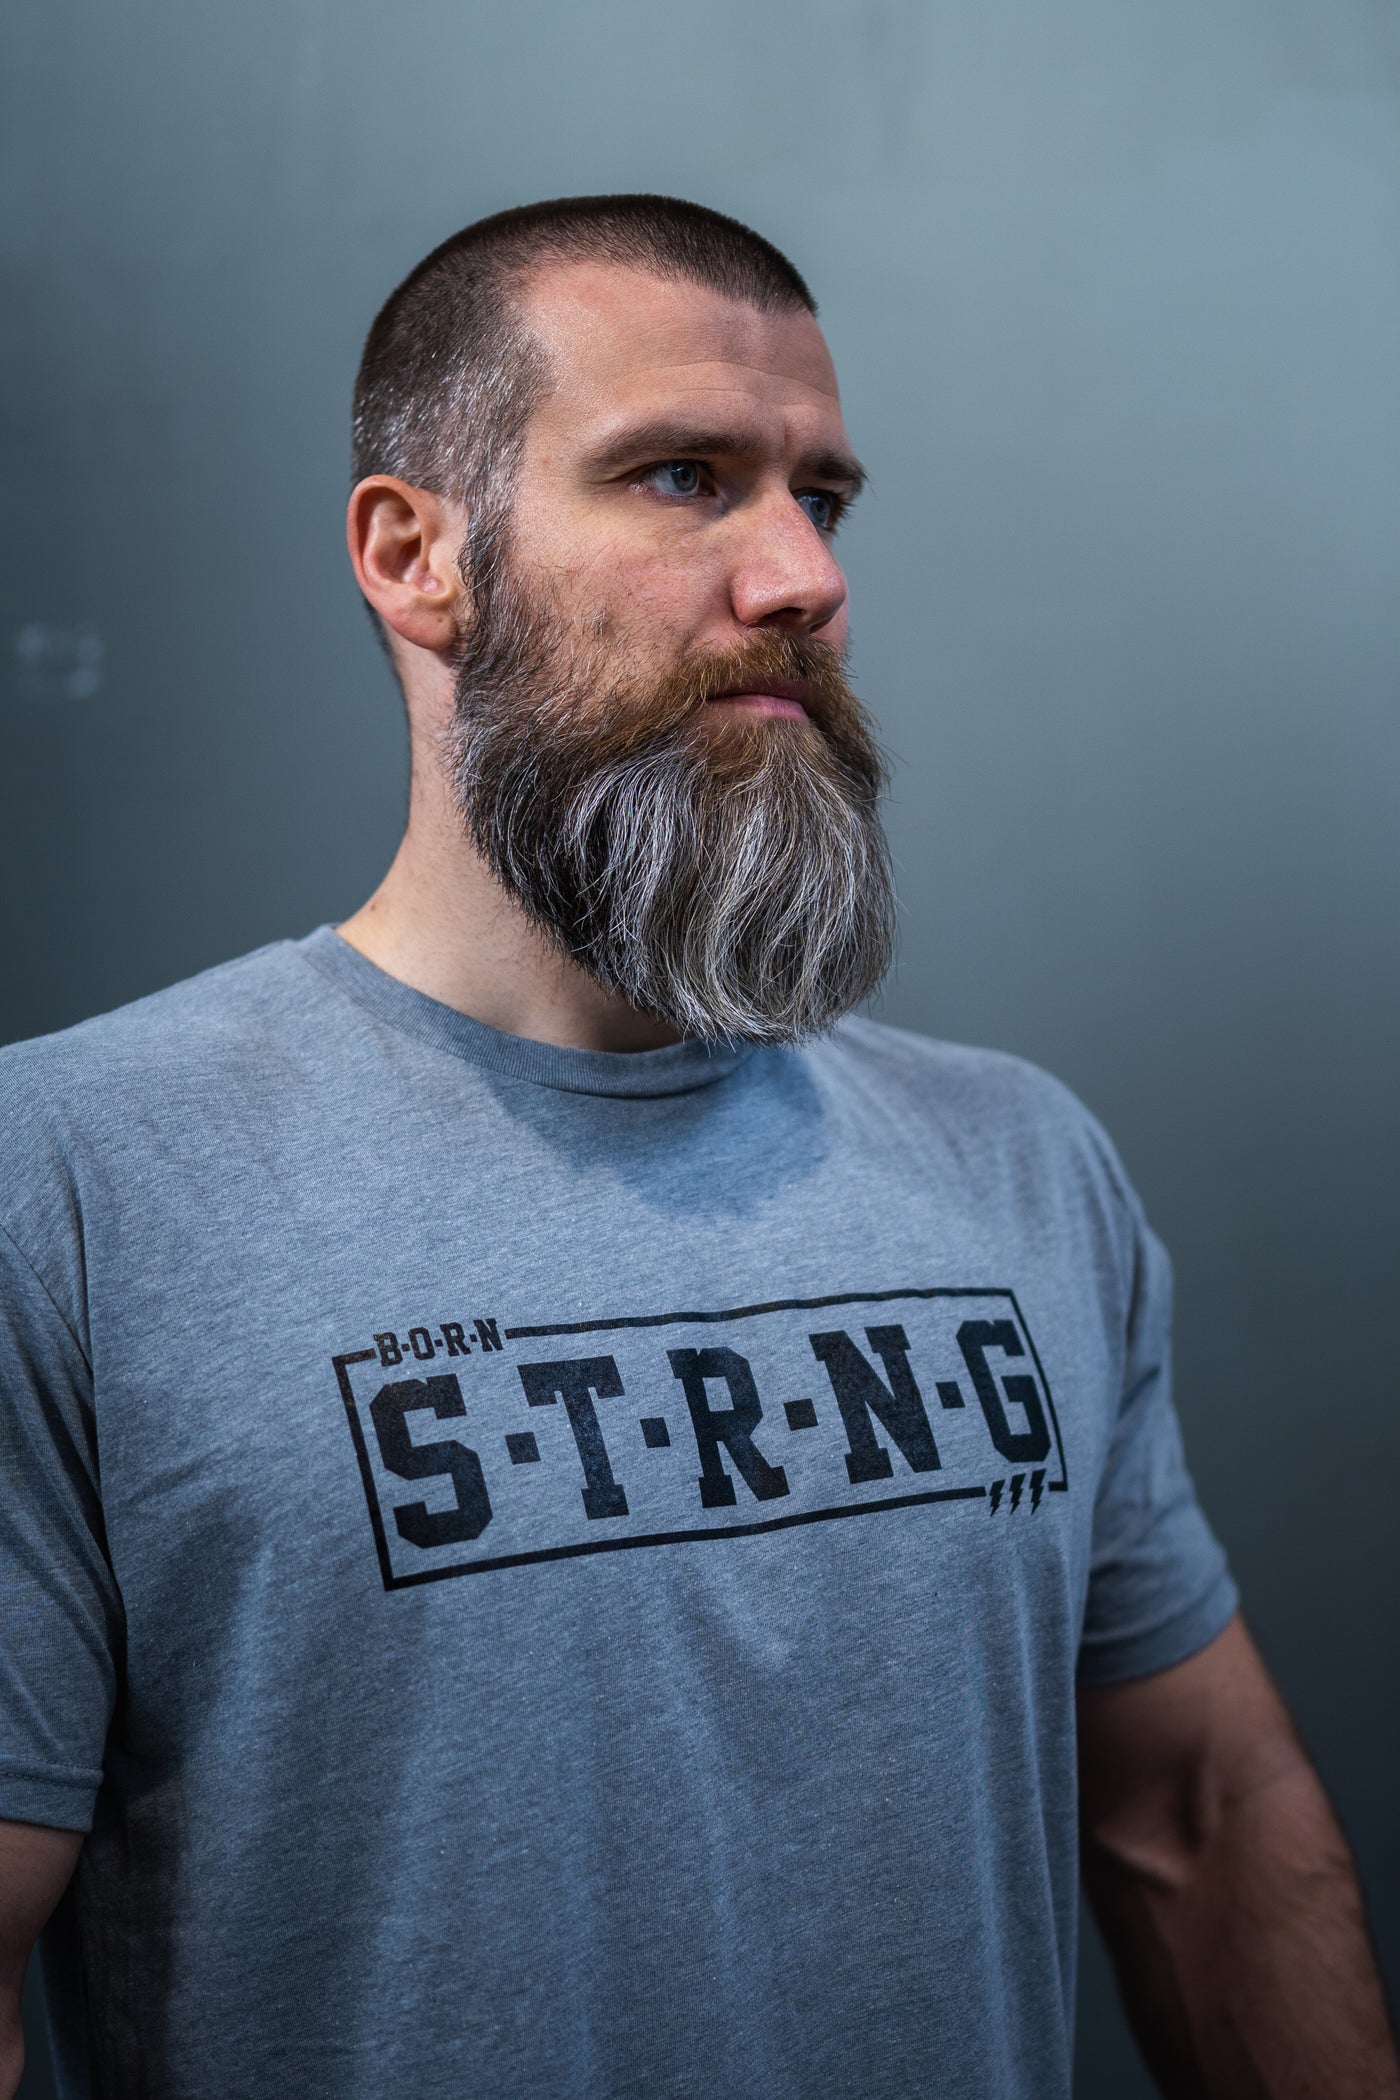 BORN STRONG - Chemise S-T-R-N-G